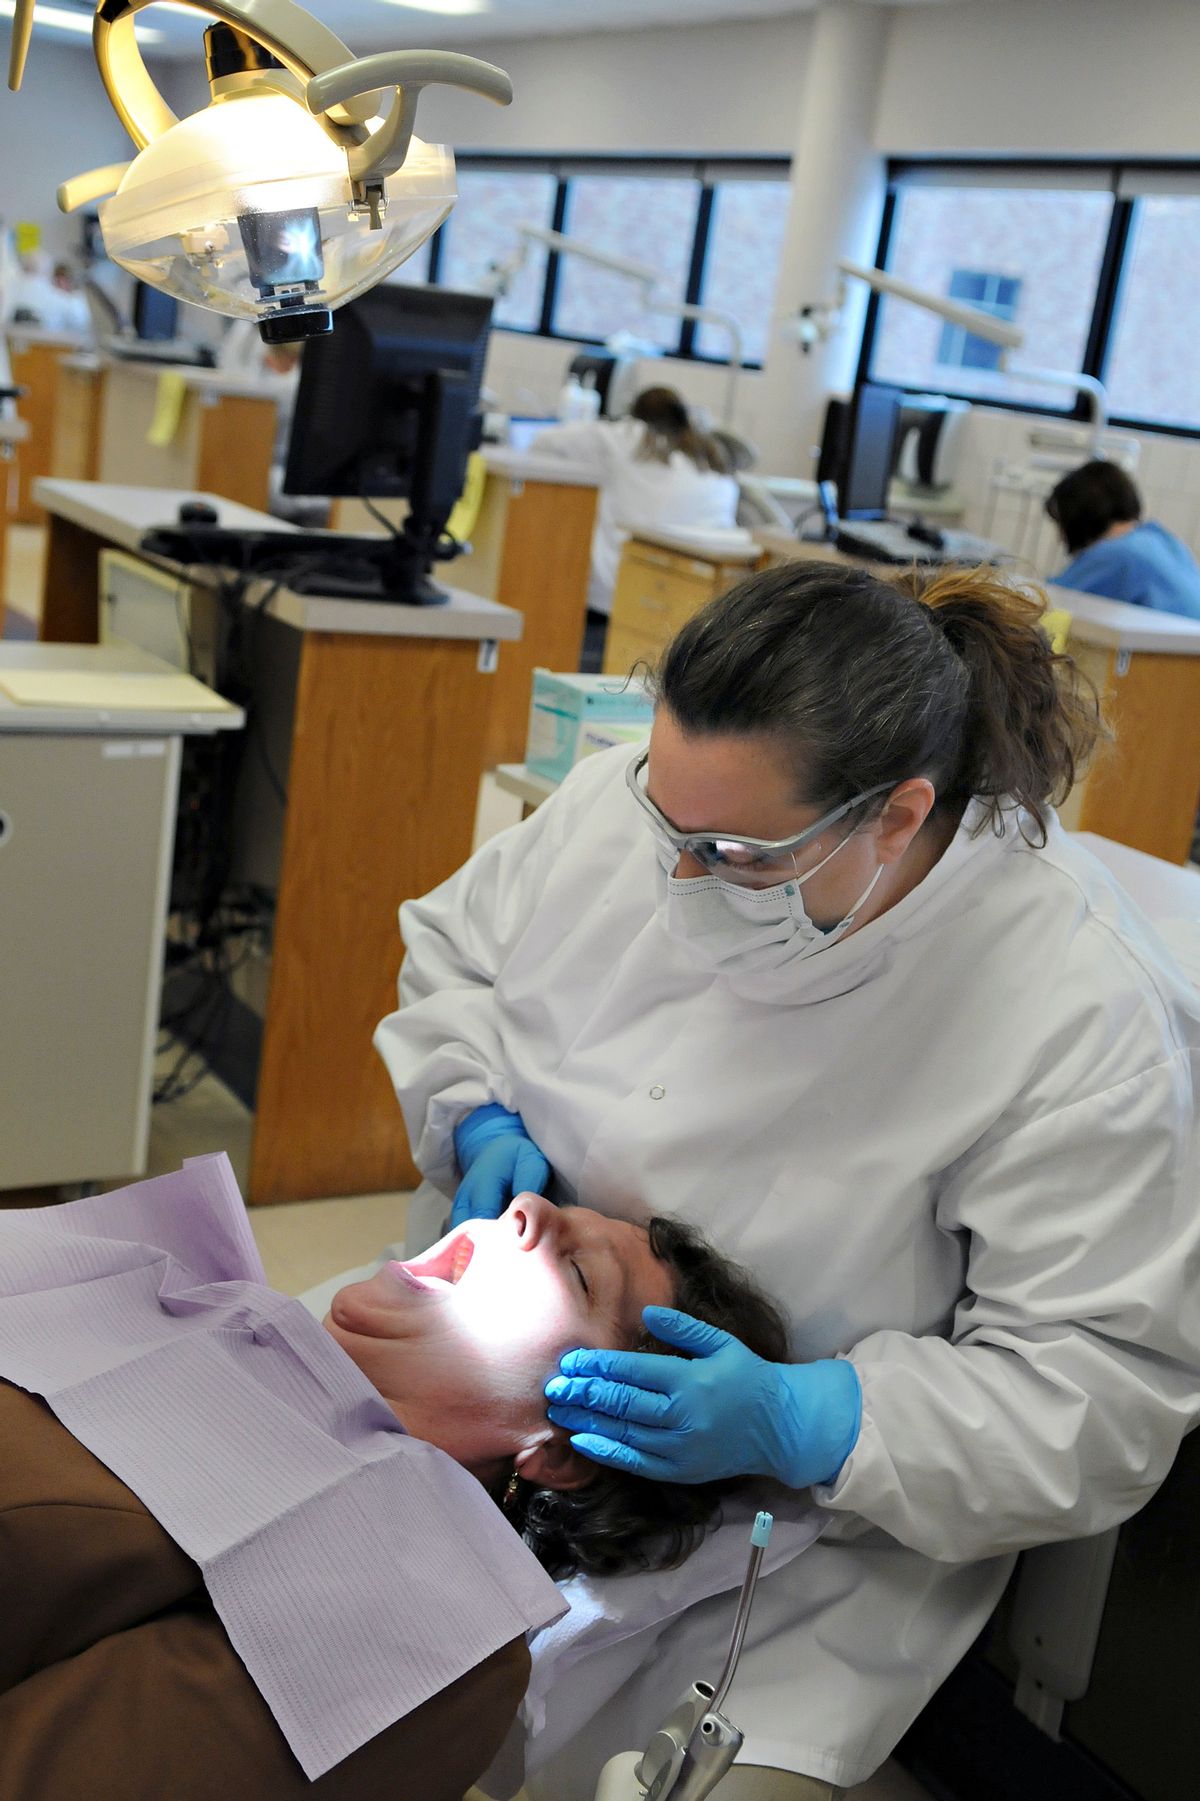 FILE - In this Dec. 4, 2009 file photo, dental hygienist Jodi Hager performs an oral exam on staff member Clare Larkin during a test at Normandale Community College in Edina, Minn. Several states are considering bills that would create a new midlevel position in dentistry called dental therapists or advanced dental hygiene practitioners. They can perform common procedures such as filling cavities or pulling teeth, though more complex procedures would still be left with dentists. (AP Photo/Dawn Villella, File) (AP)